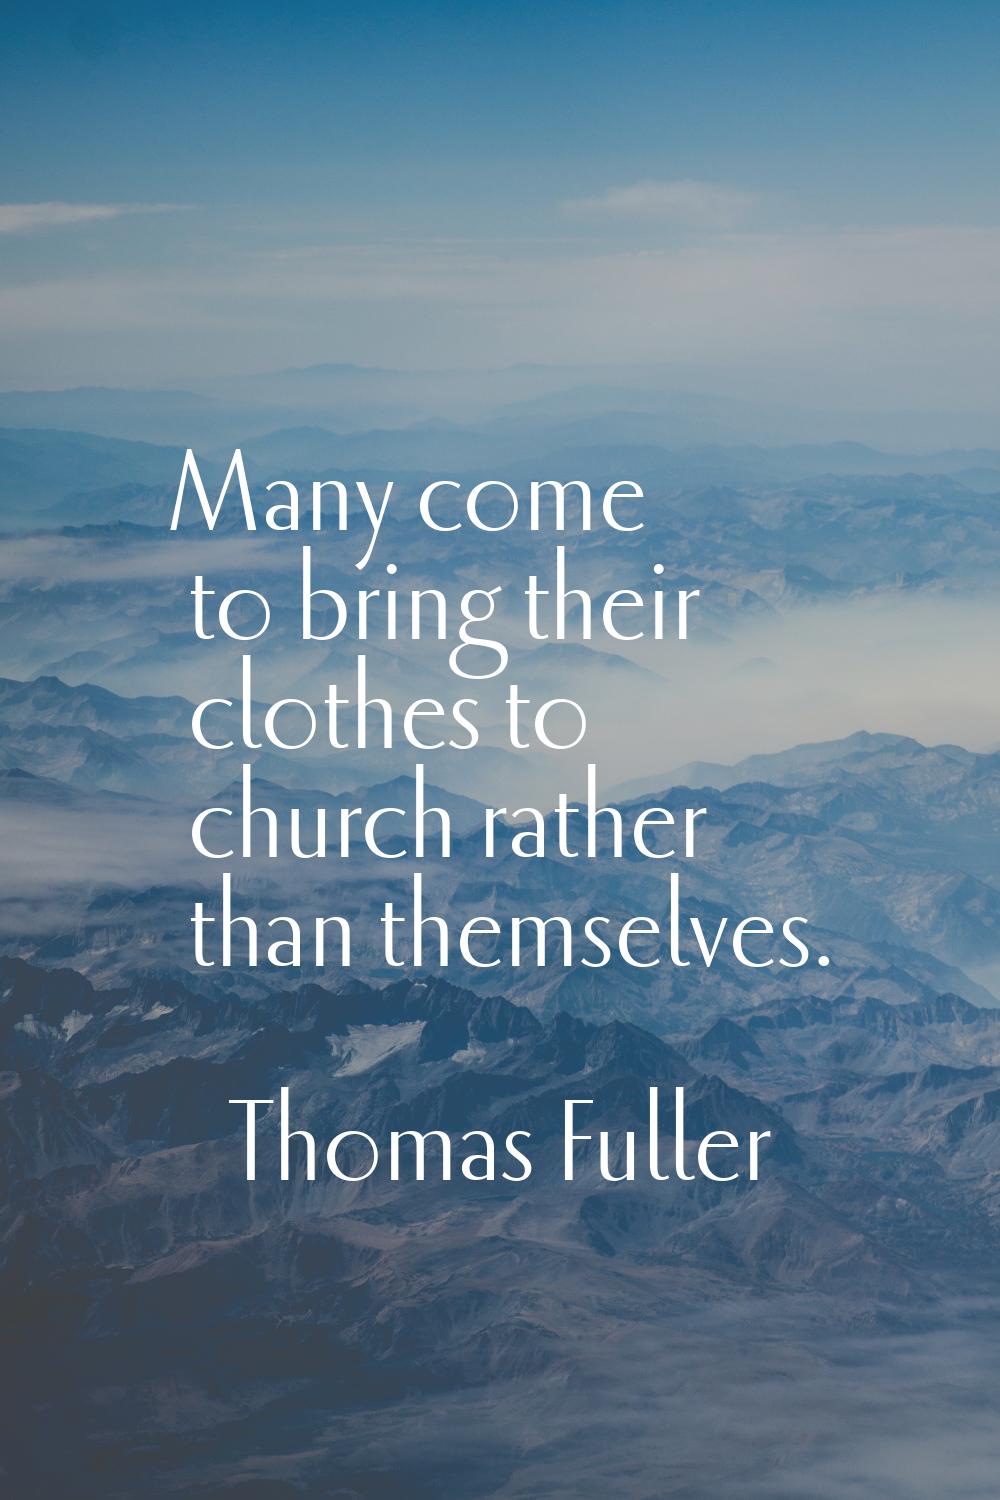 Many come to bring their clothes to church rather than themselves.